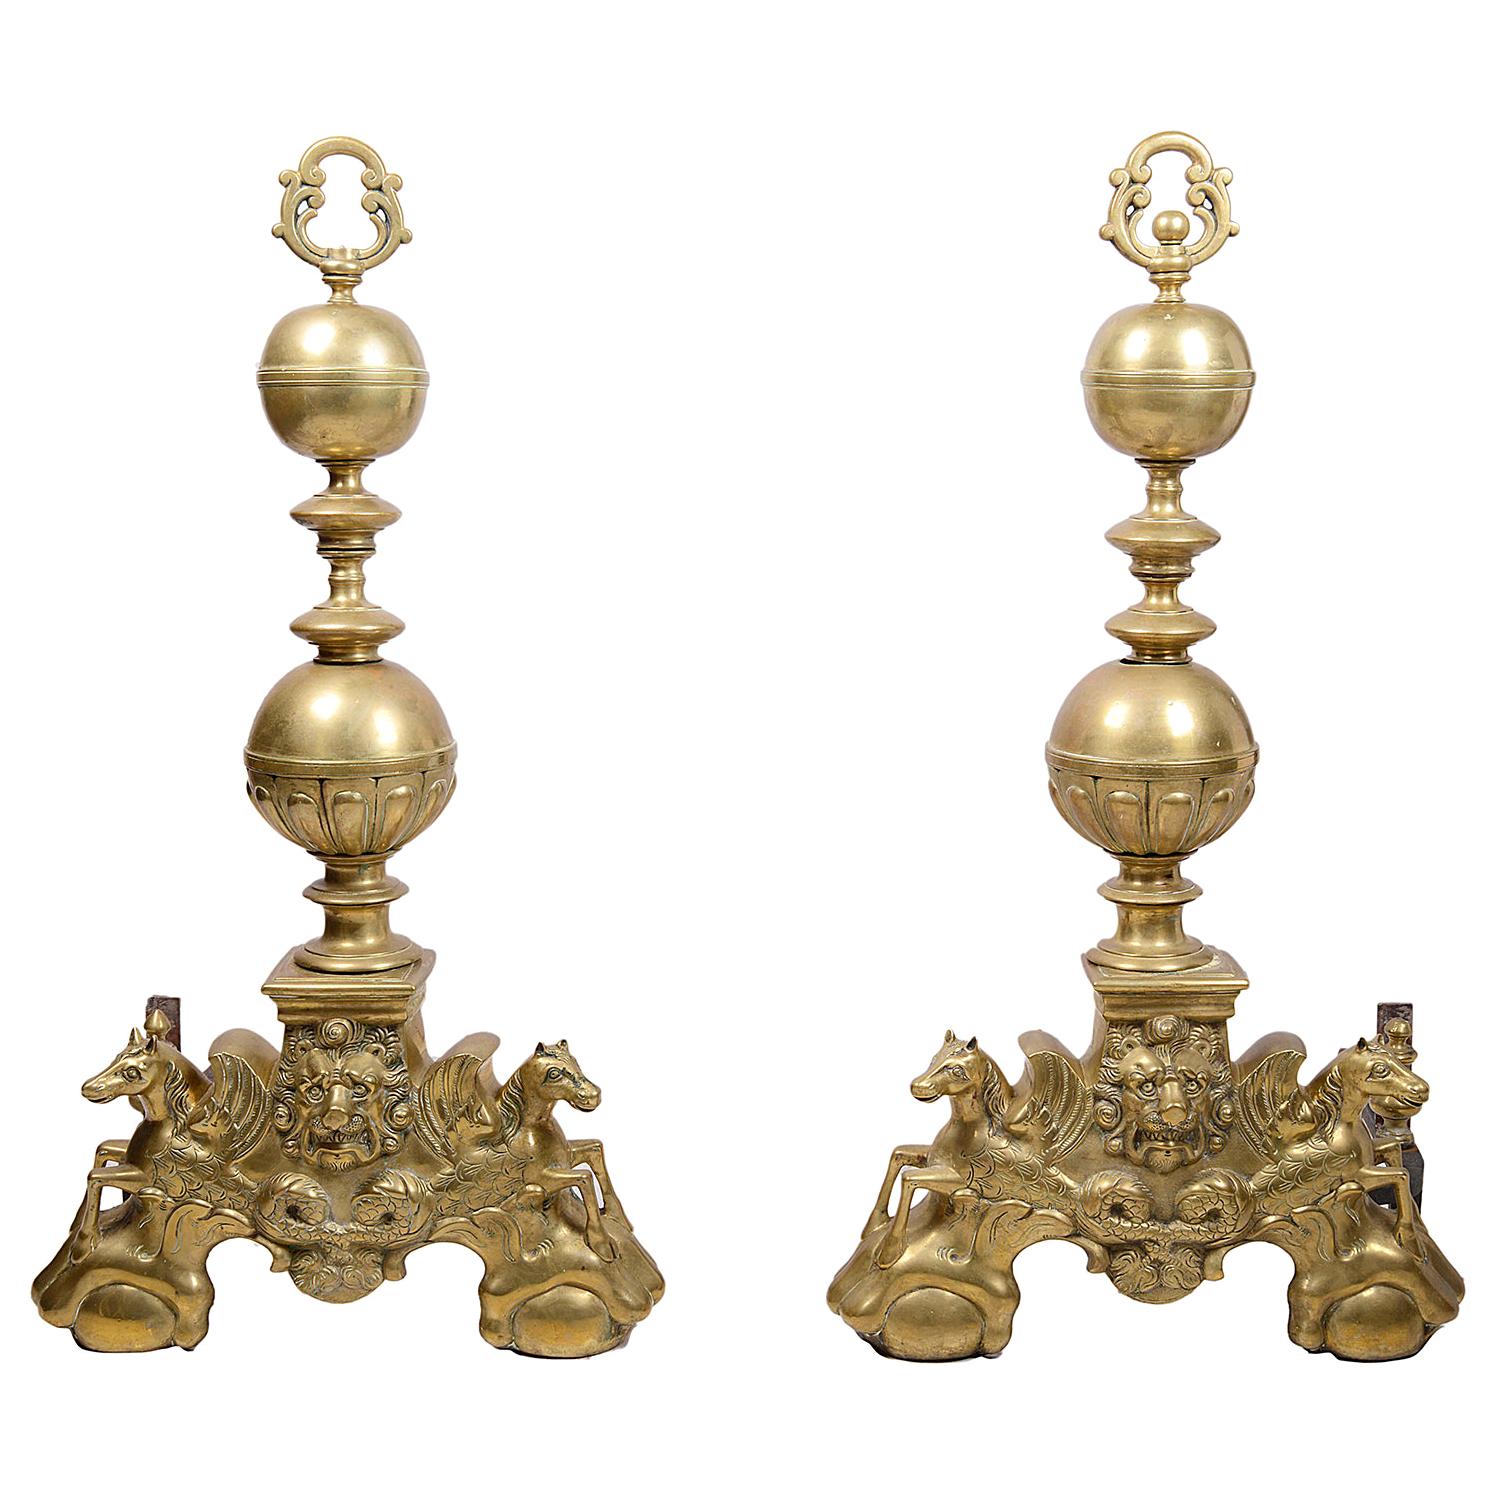 Large Pair of 19th Century Classical Brass Andirons or Firedogs